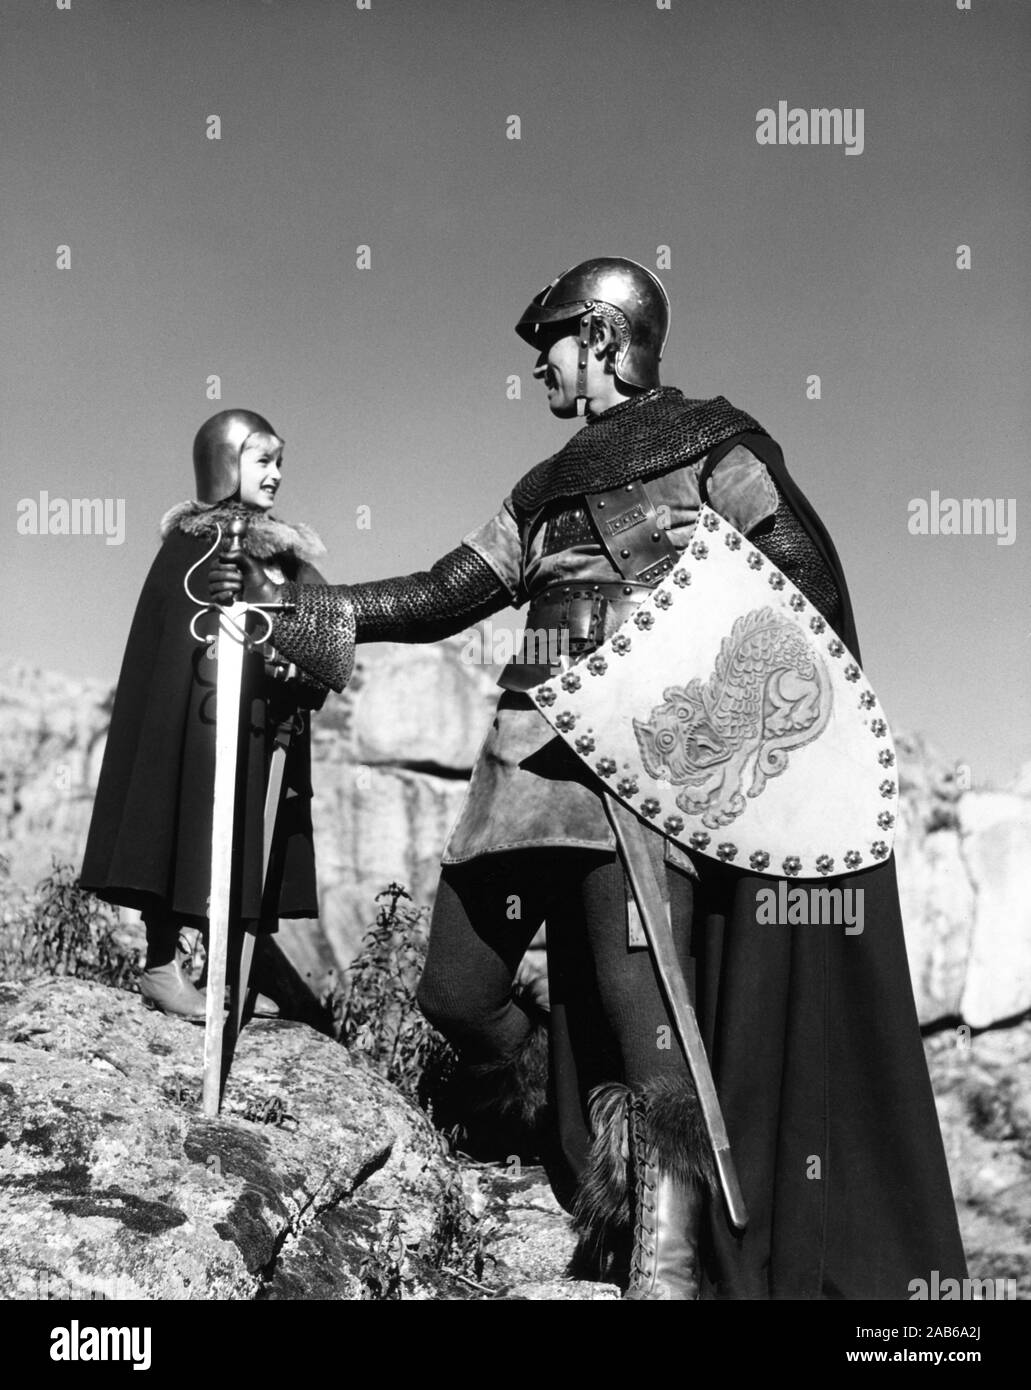 CHARLTON HESTON and his son FRASER HESTON in matching armour on set candid during location filming for EL CID 1961 director ANTHONY MANN music Miklos Rozsa  Italy / USA co-production Samuel Bronston Productions / Dear Film Produzione Stock Photo